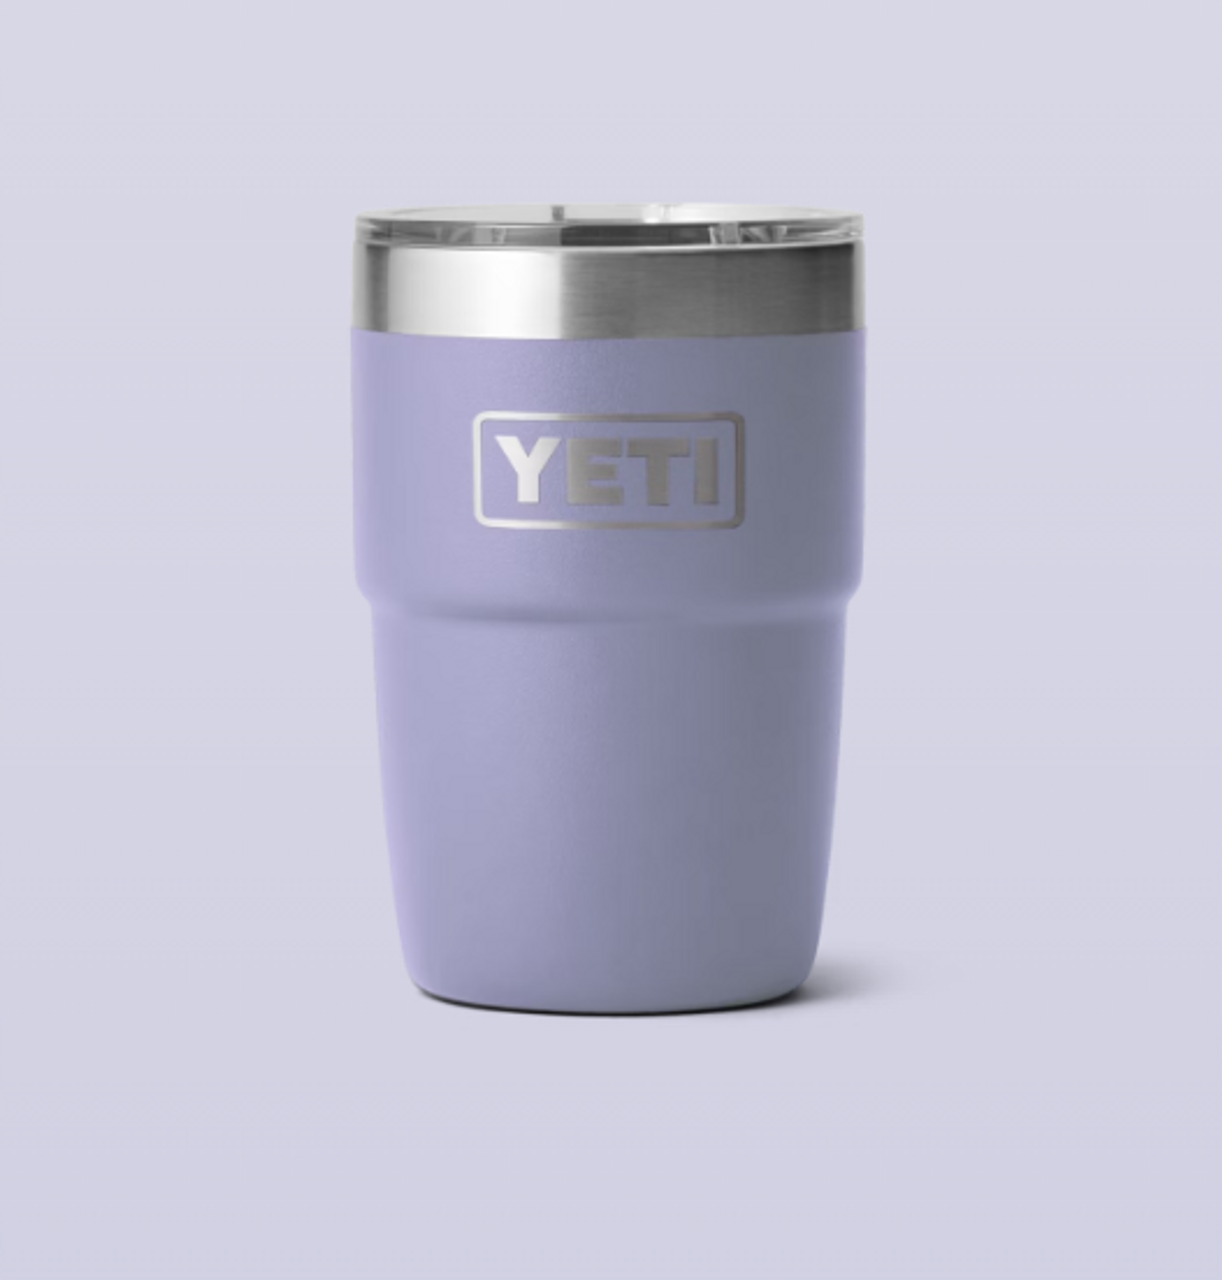 https://cdn11.bigcommerce.com/s-ecrsdtq42/images/stencil/1280x1280/products/5628/12793/RiverandTrail_Yeti_8ozStackableCupwithMagsliderLid_CosmicLilac__09307.1697122026.png?c=1